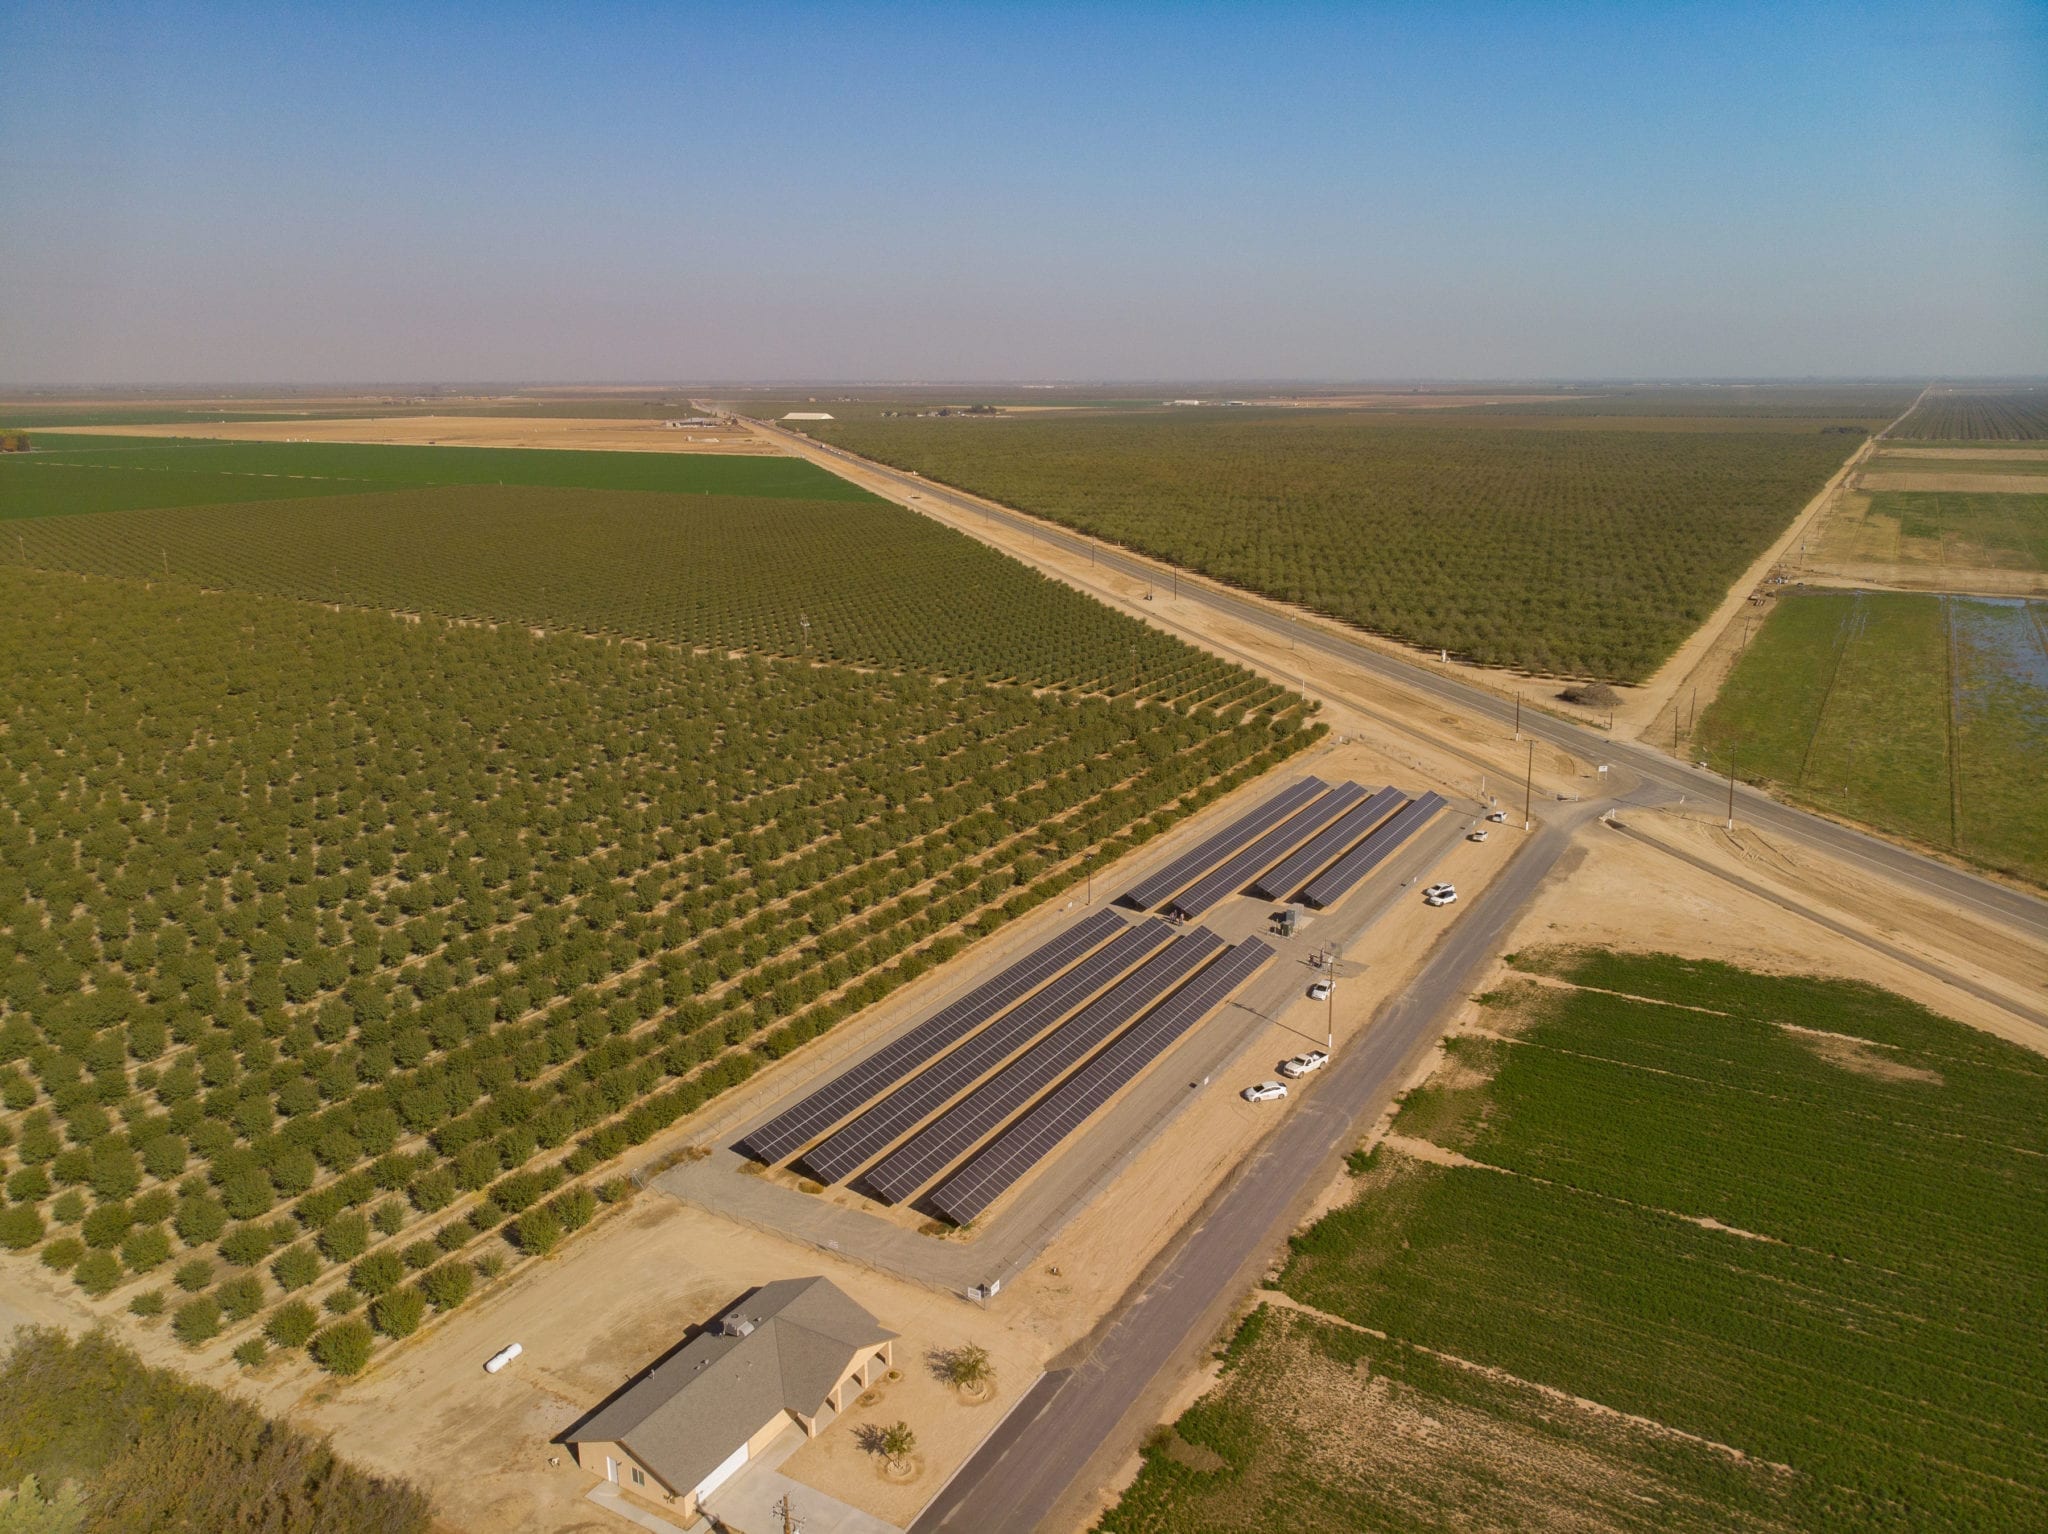 Aerial view of the solar system and surrounding crop and farm land at the Dan Habib Ranch in Fresno, California.